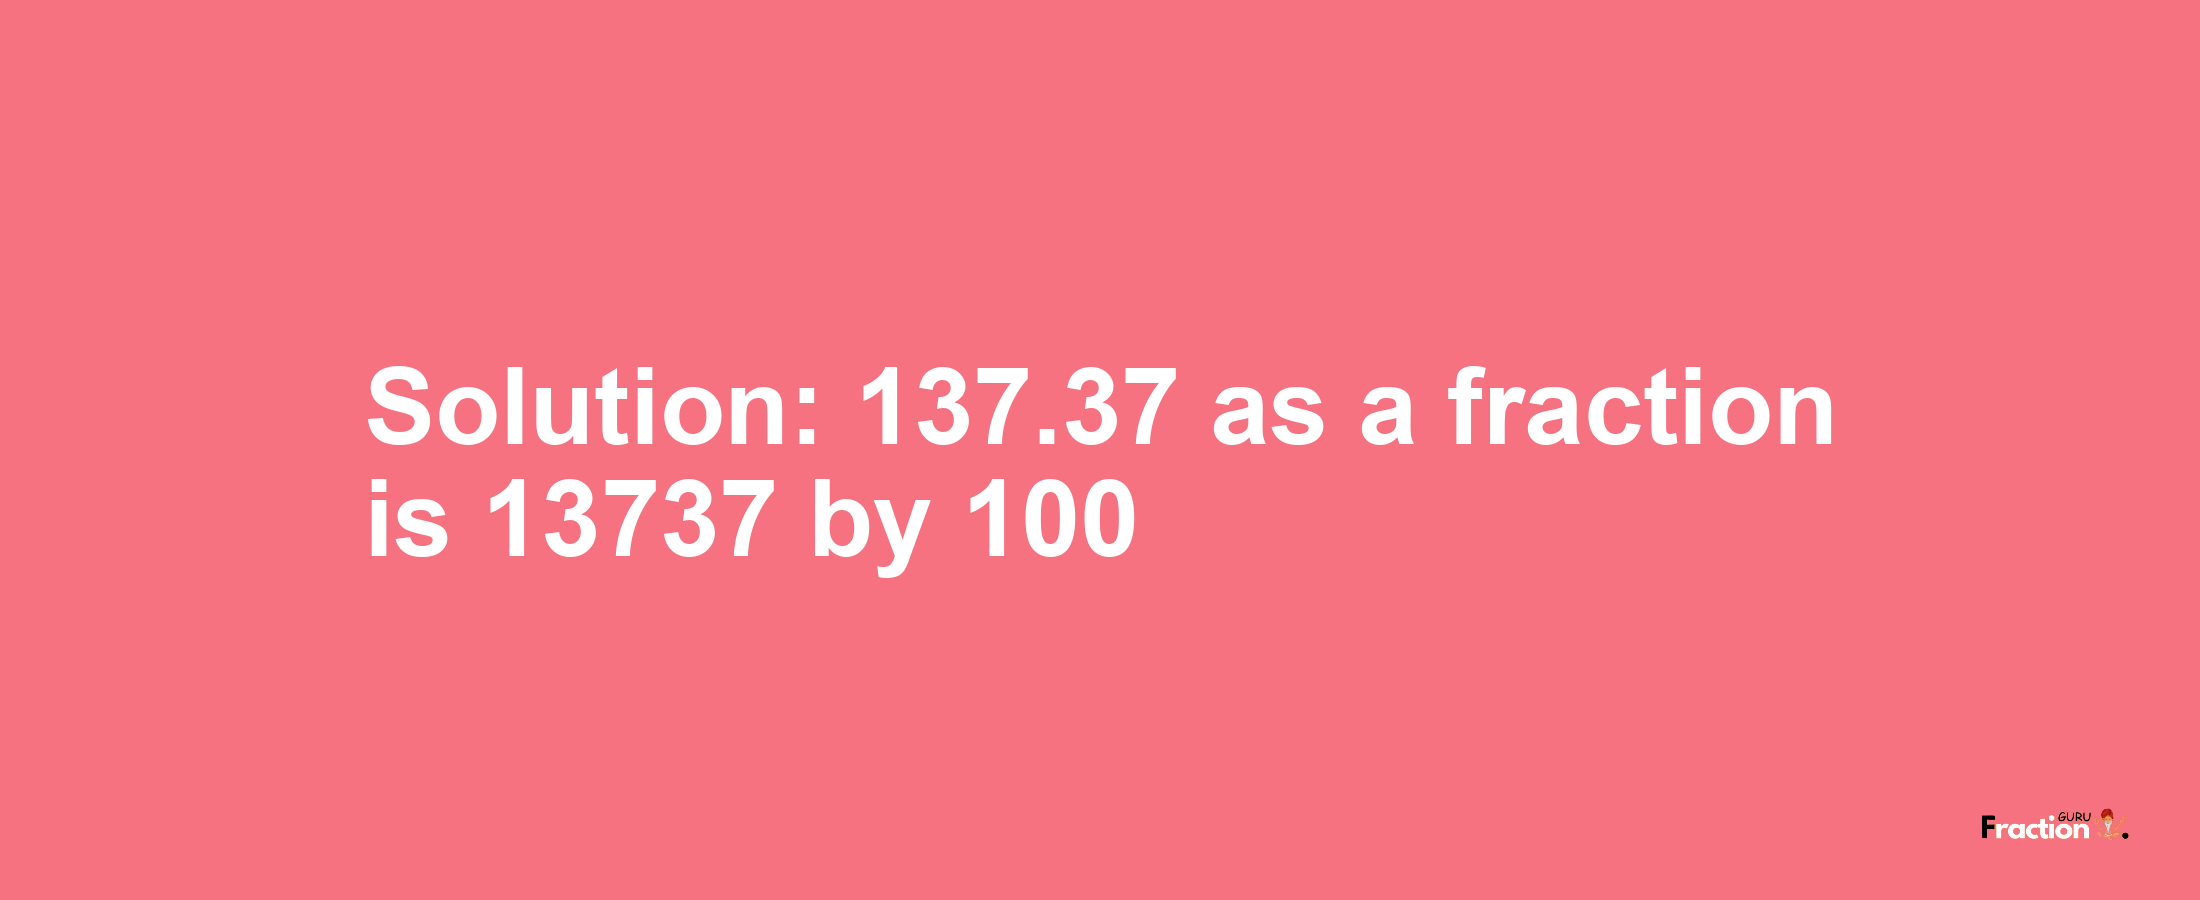 Solution:137.37 as a fraction is 13737/100